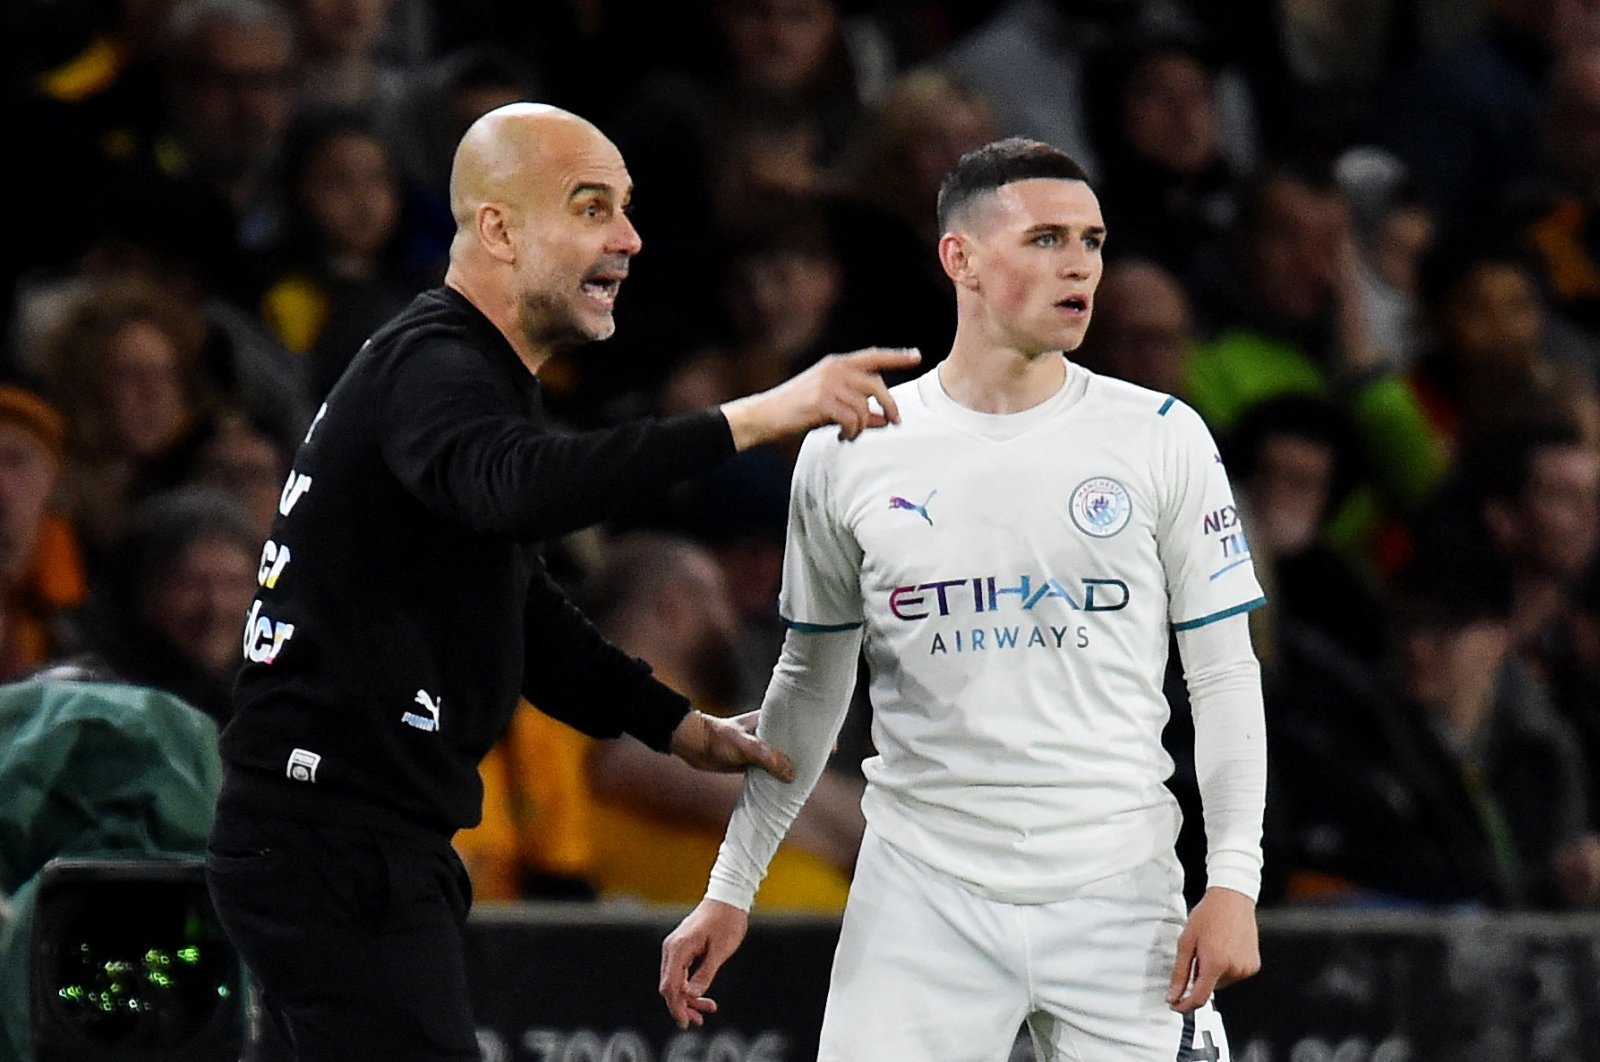 Man City manager Pep Guardiola talks to Phil Foden during a Premier League match against Wolves, Wolverhampton, England, May 11, 2022. (Reuters Photo)